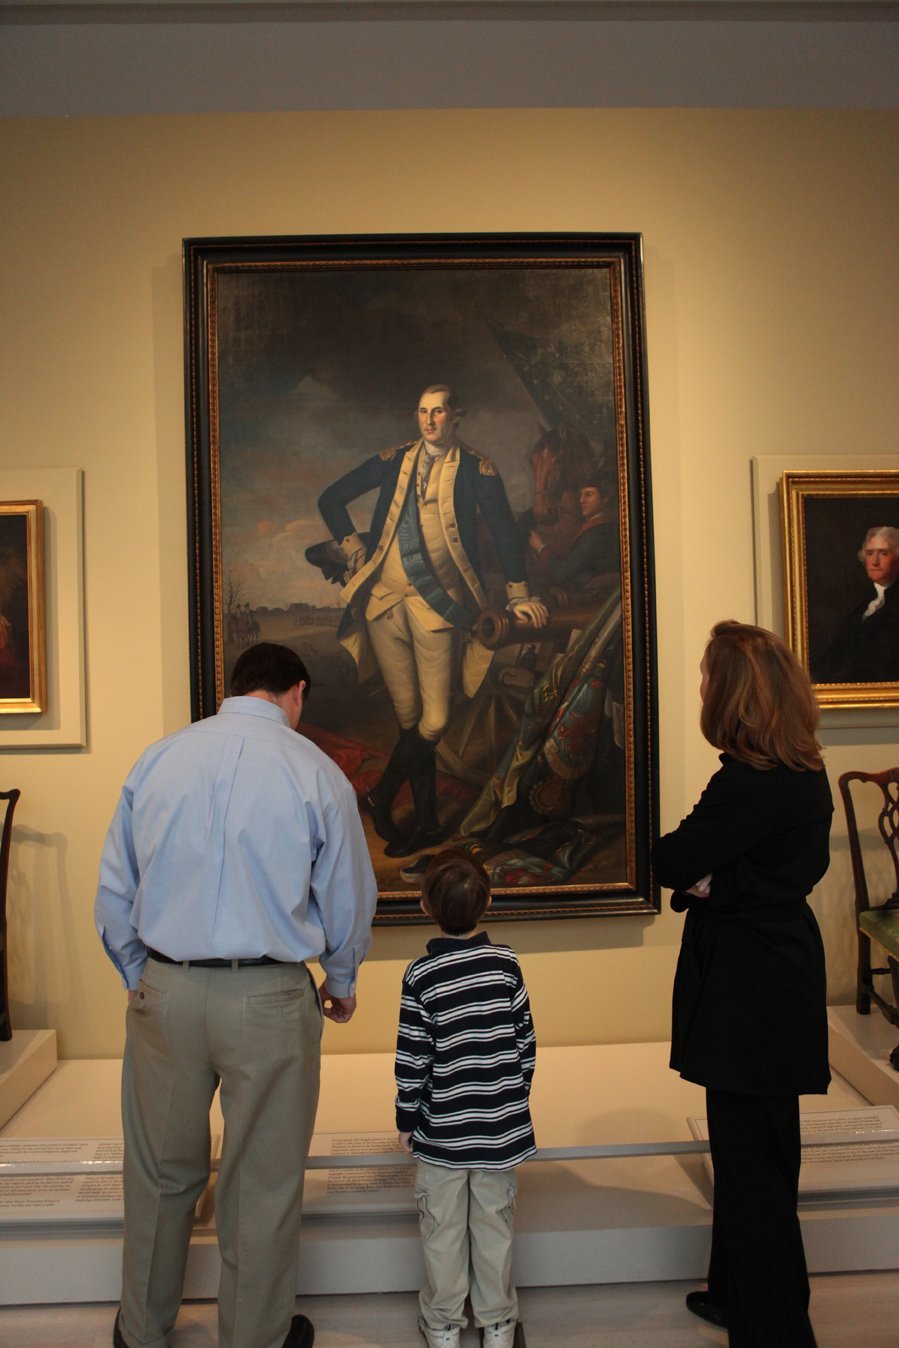 A man, child, and woman standing in front of a painting at a museum